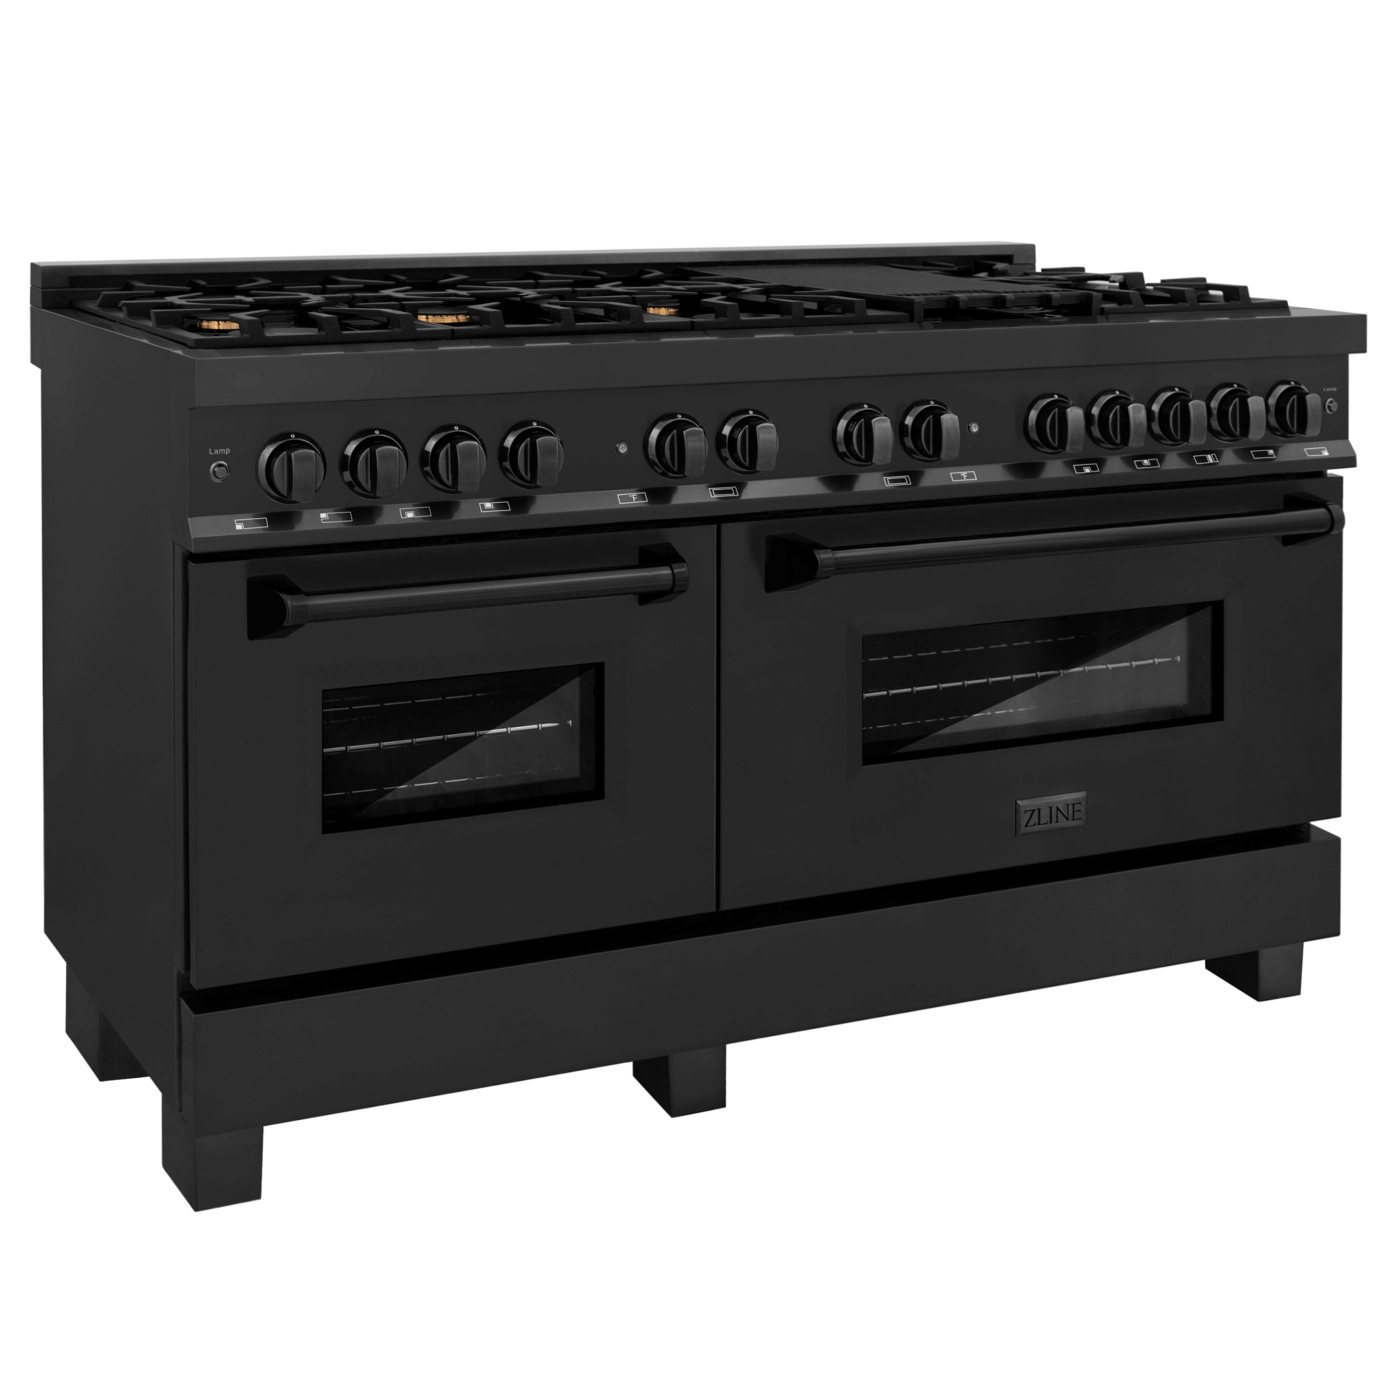 ZLINE 60 in. 7.4 cu. ft. Dual Fuel Range with Gas Stove and Electric Oven in Black Stainless Steel with Brass Burners (RAB-60) - white background